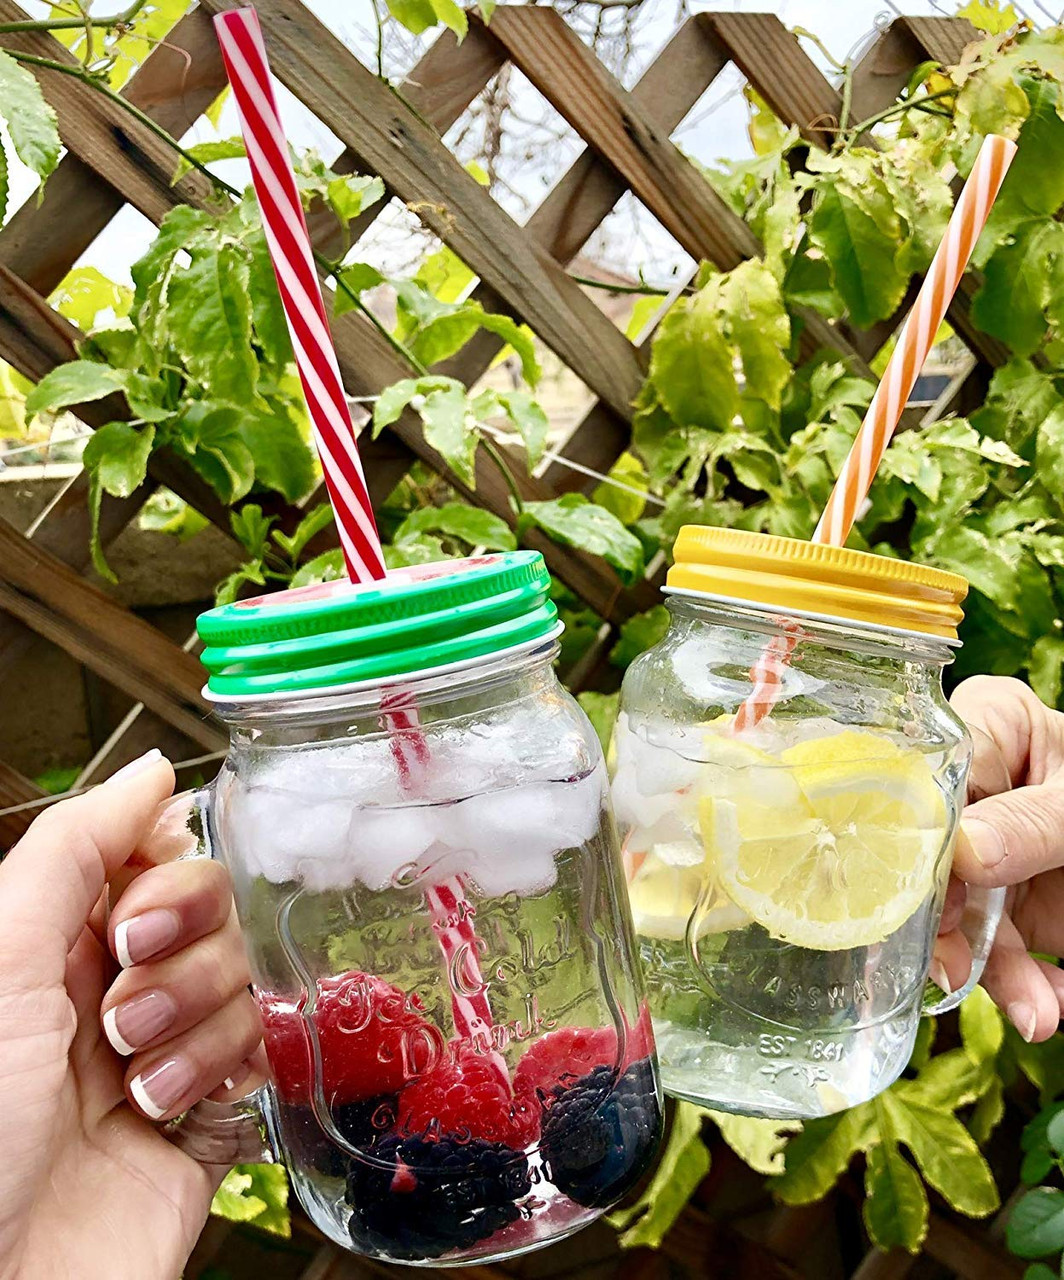 4 Pack x 16 oz Mason Jar Mugs with Handles, Lids, Reusable Straws with  Fruit Patterned